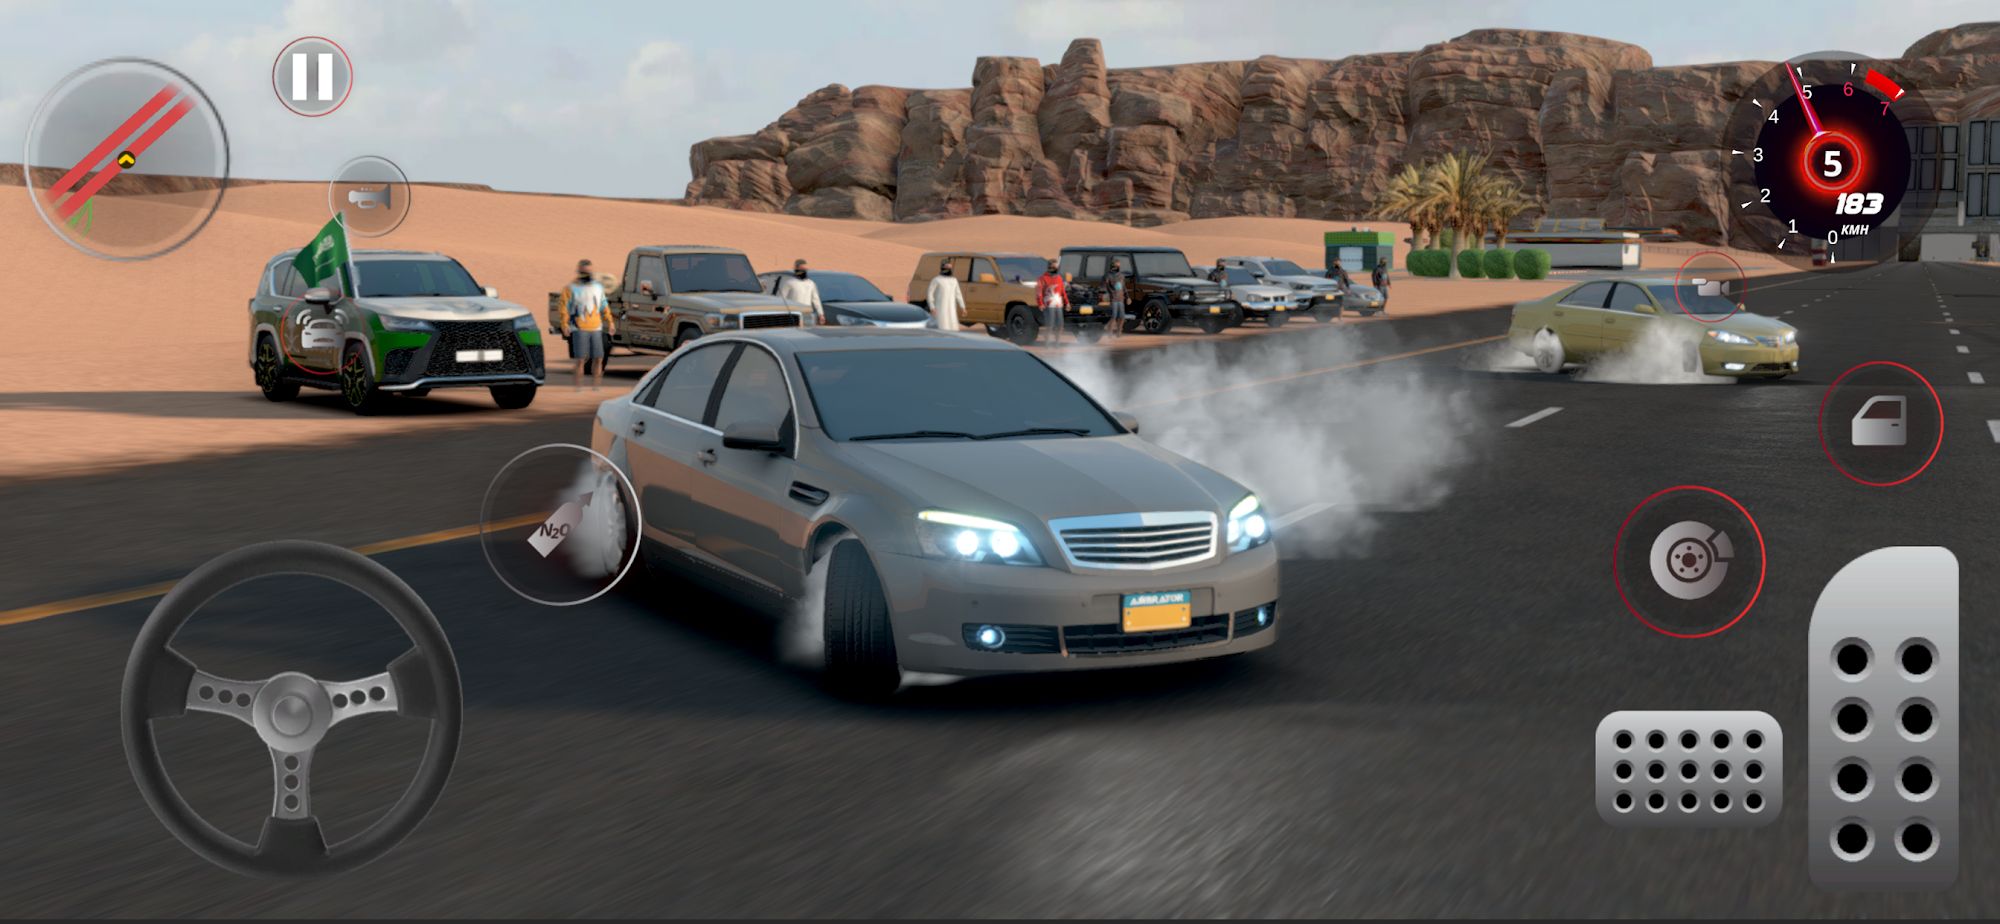 Download Drift for Life Android free game.